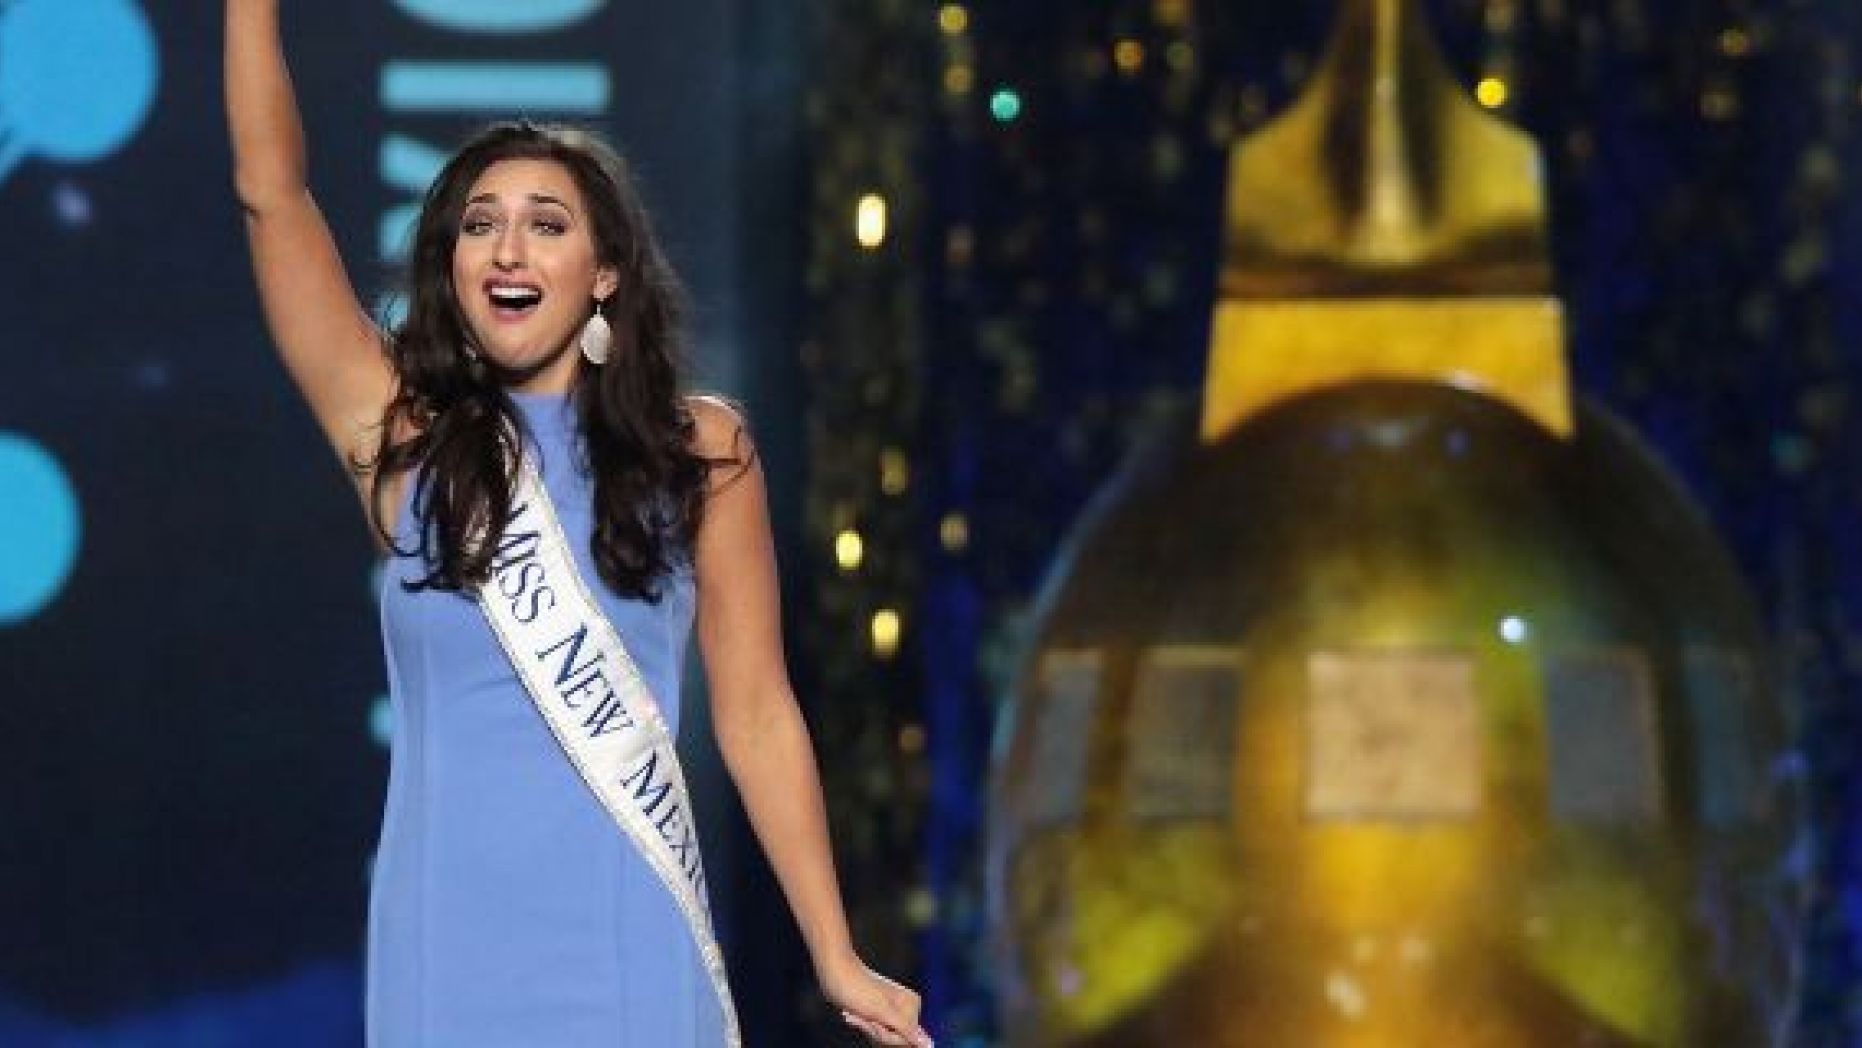 The Miss New Mexico pageant was struck with controversy when contestants weren't paid their scholarship money.